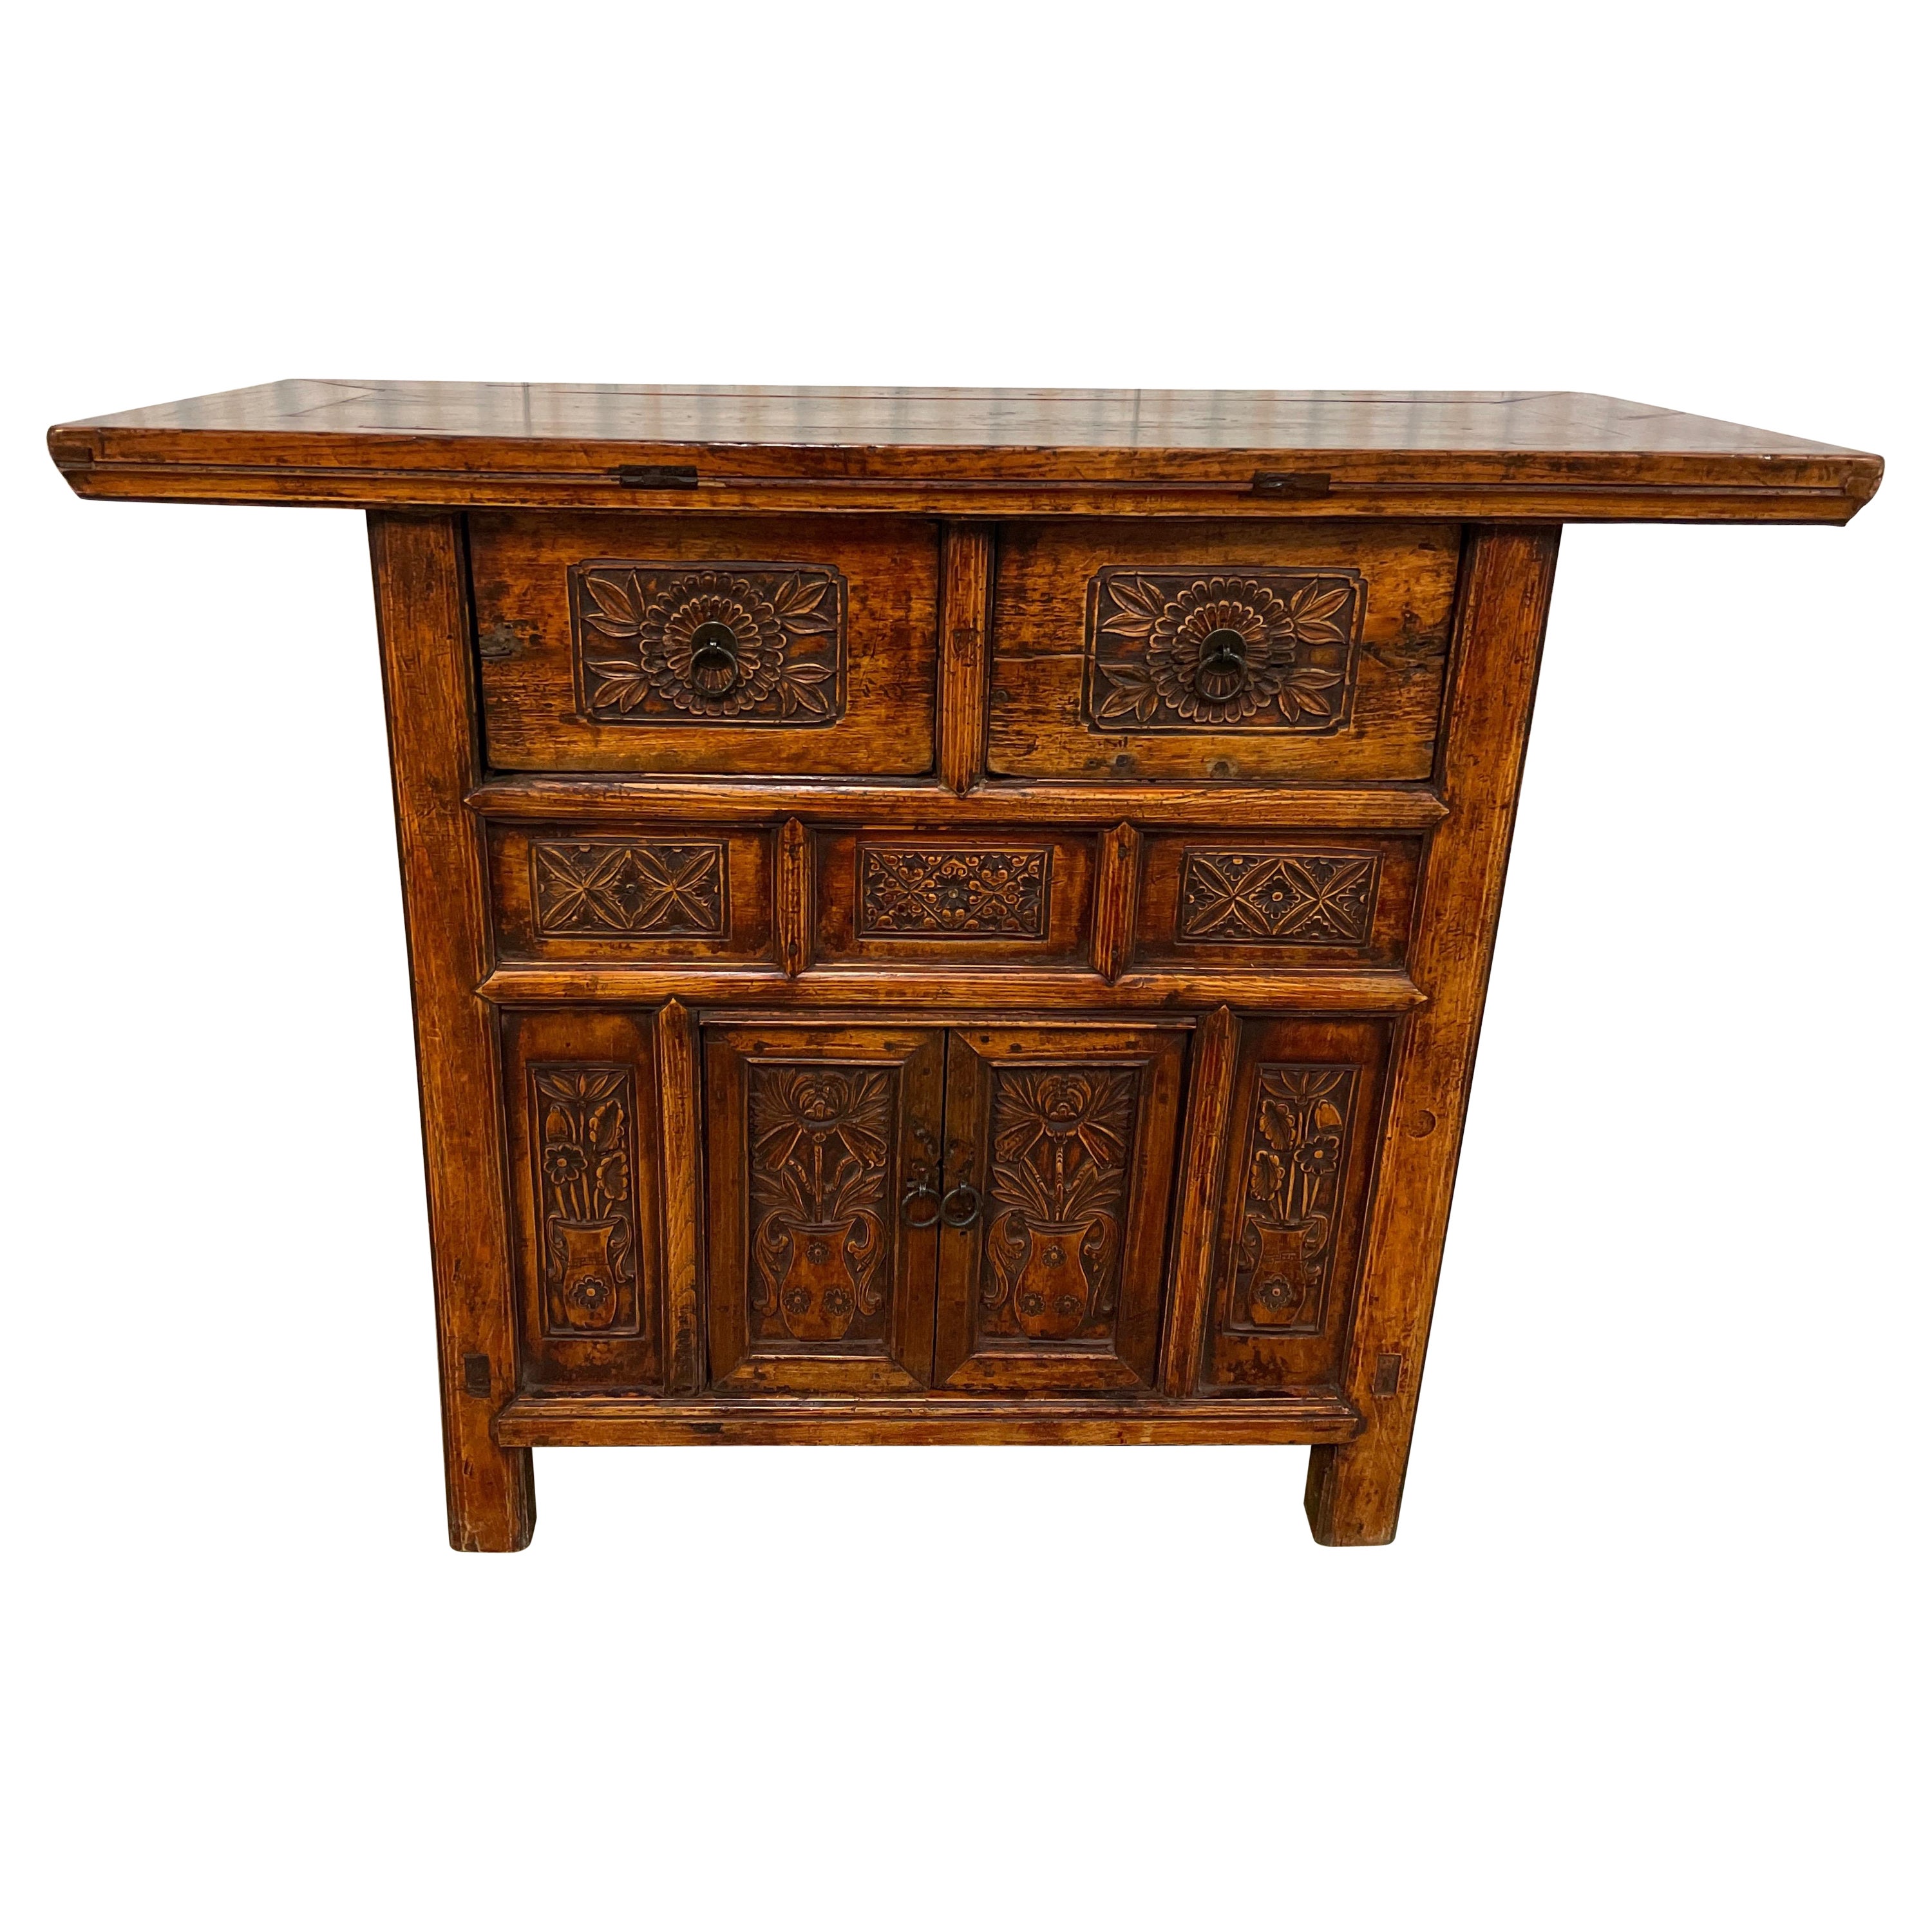 Vintage Carved Asian Console / Altar Table For Sale at 1stDibs